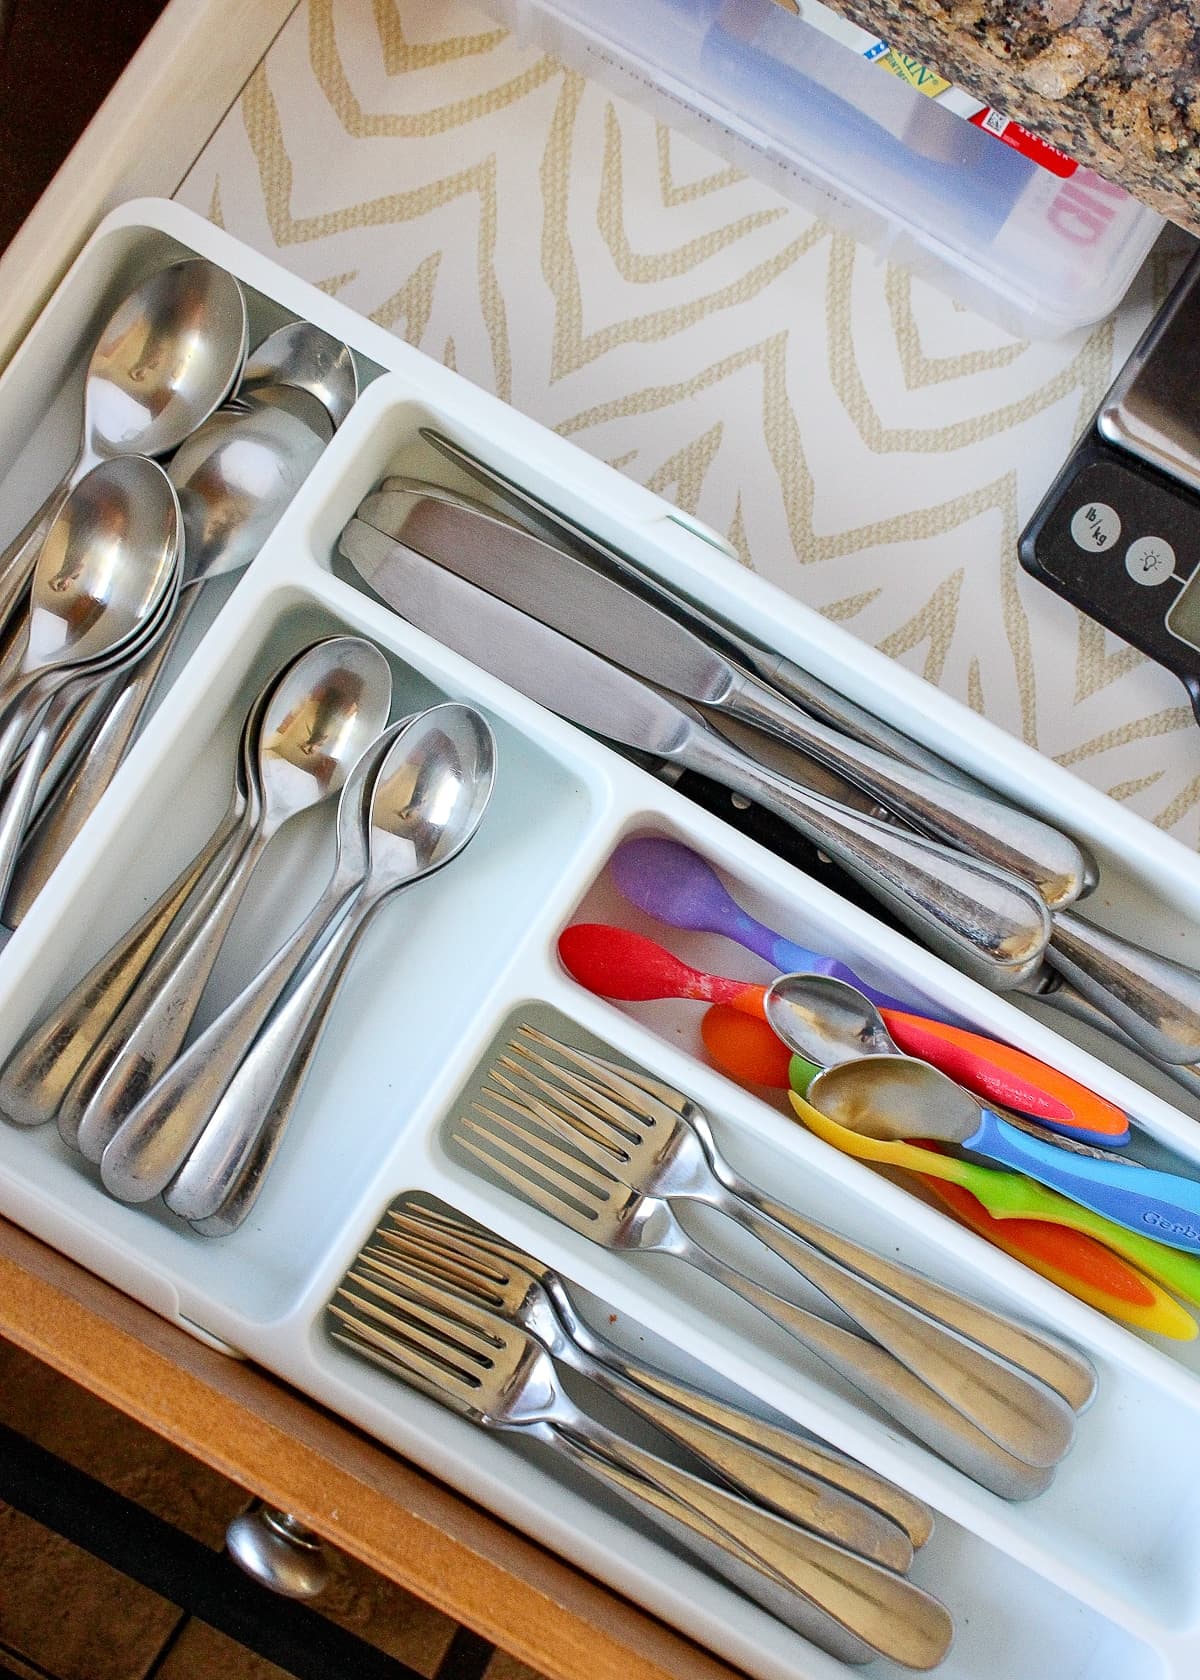 My Top 10 Tips for Organizing Your Kitchen Drawers - The Homes I